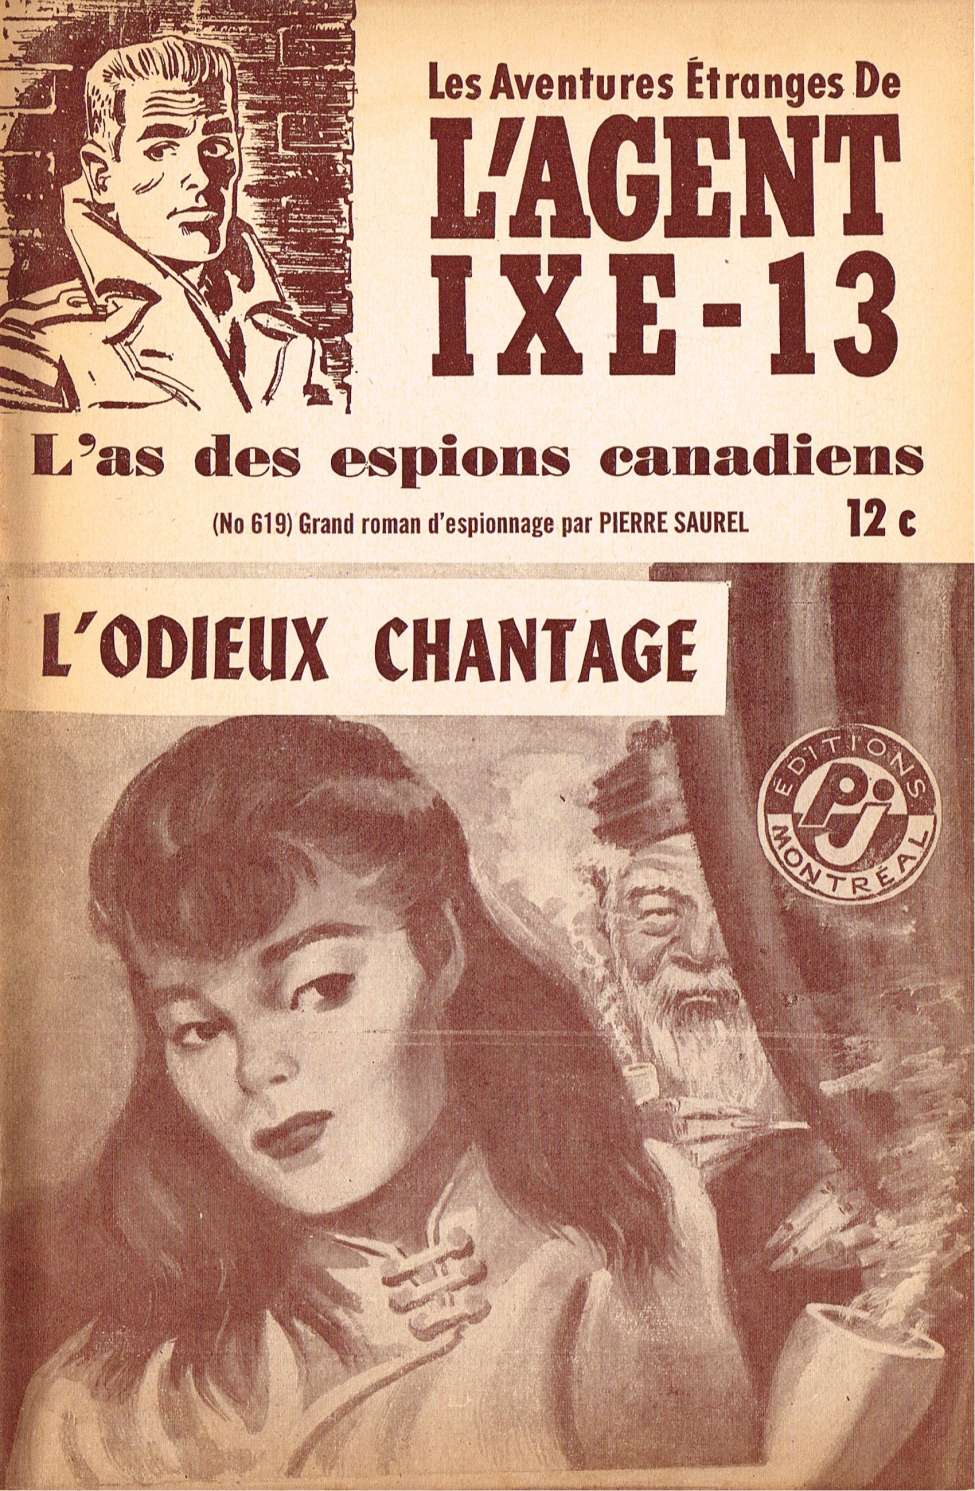 Book Cover For L'Agent IXE-13 v2 619 - L'odieux chantage